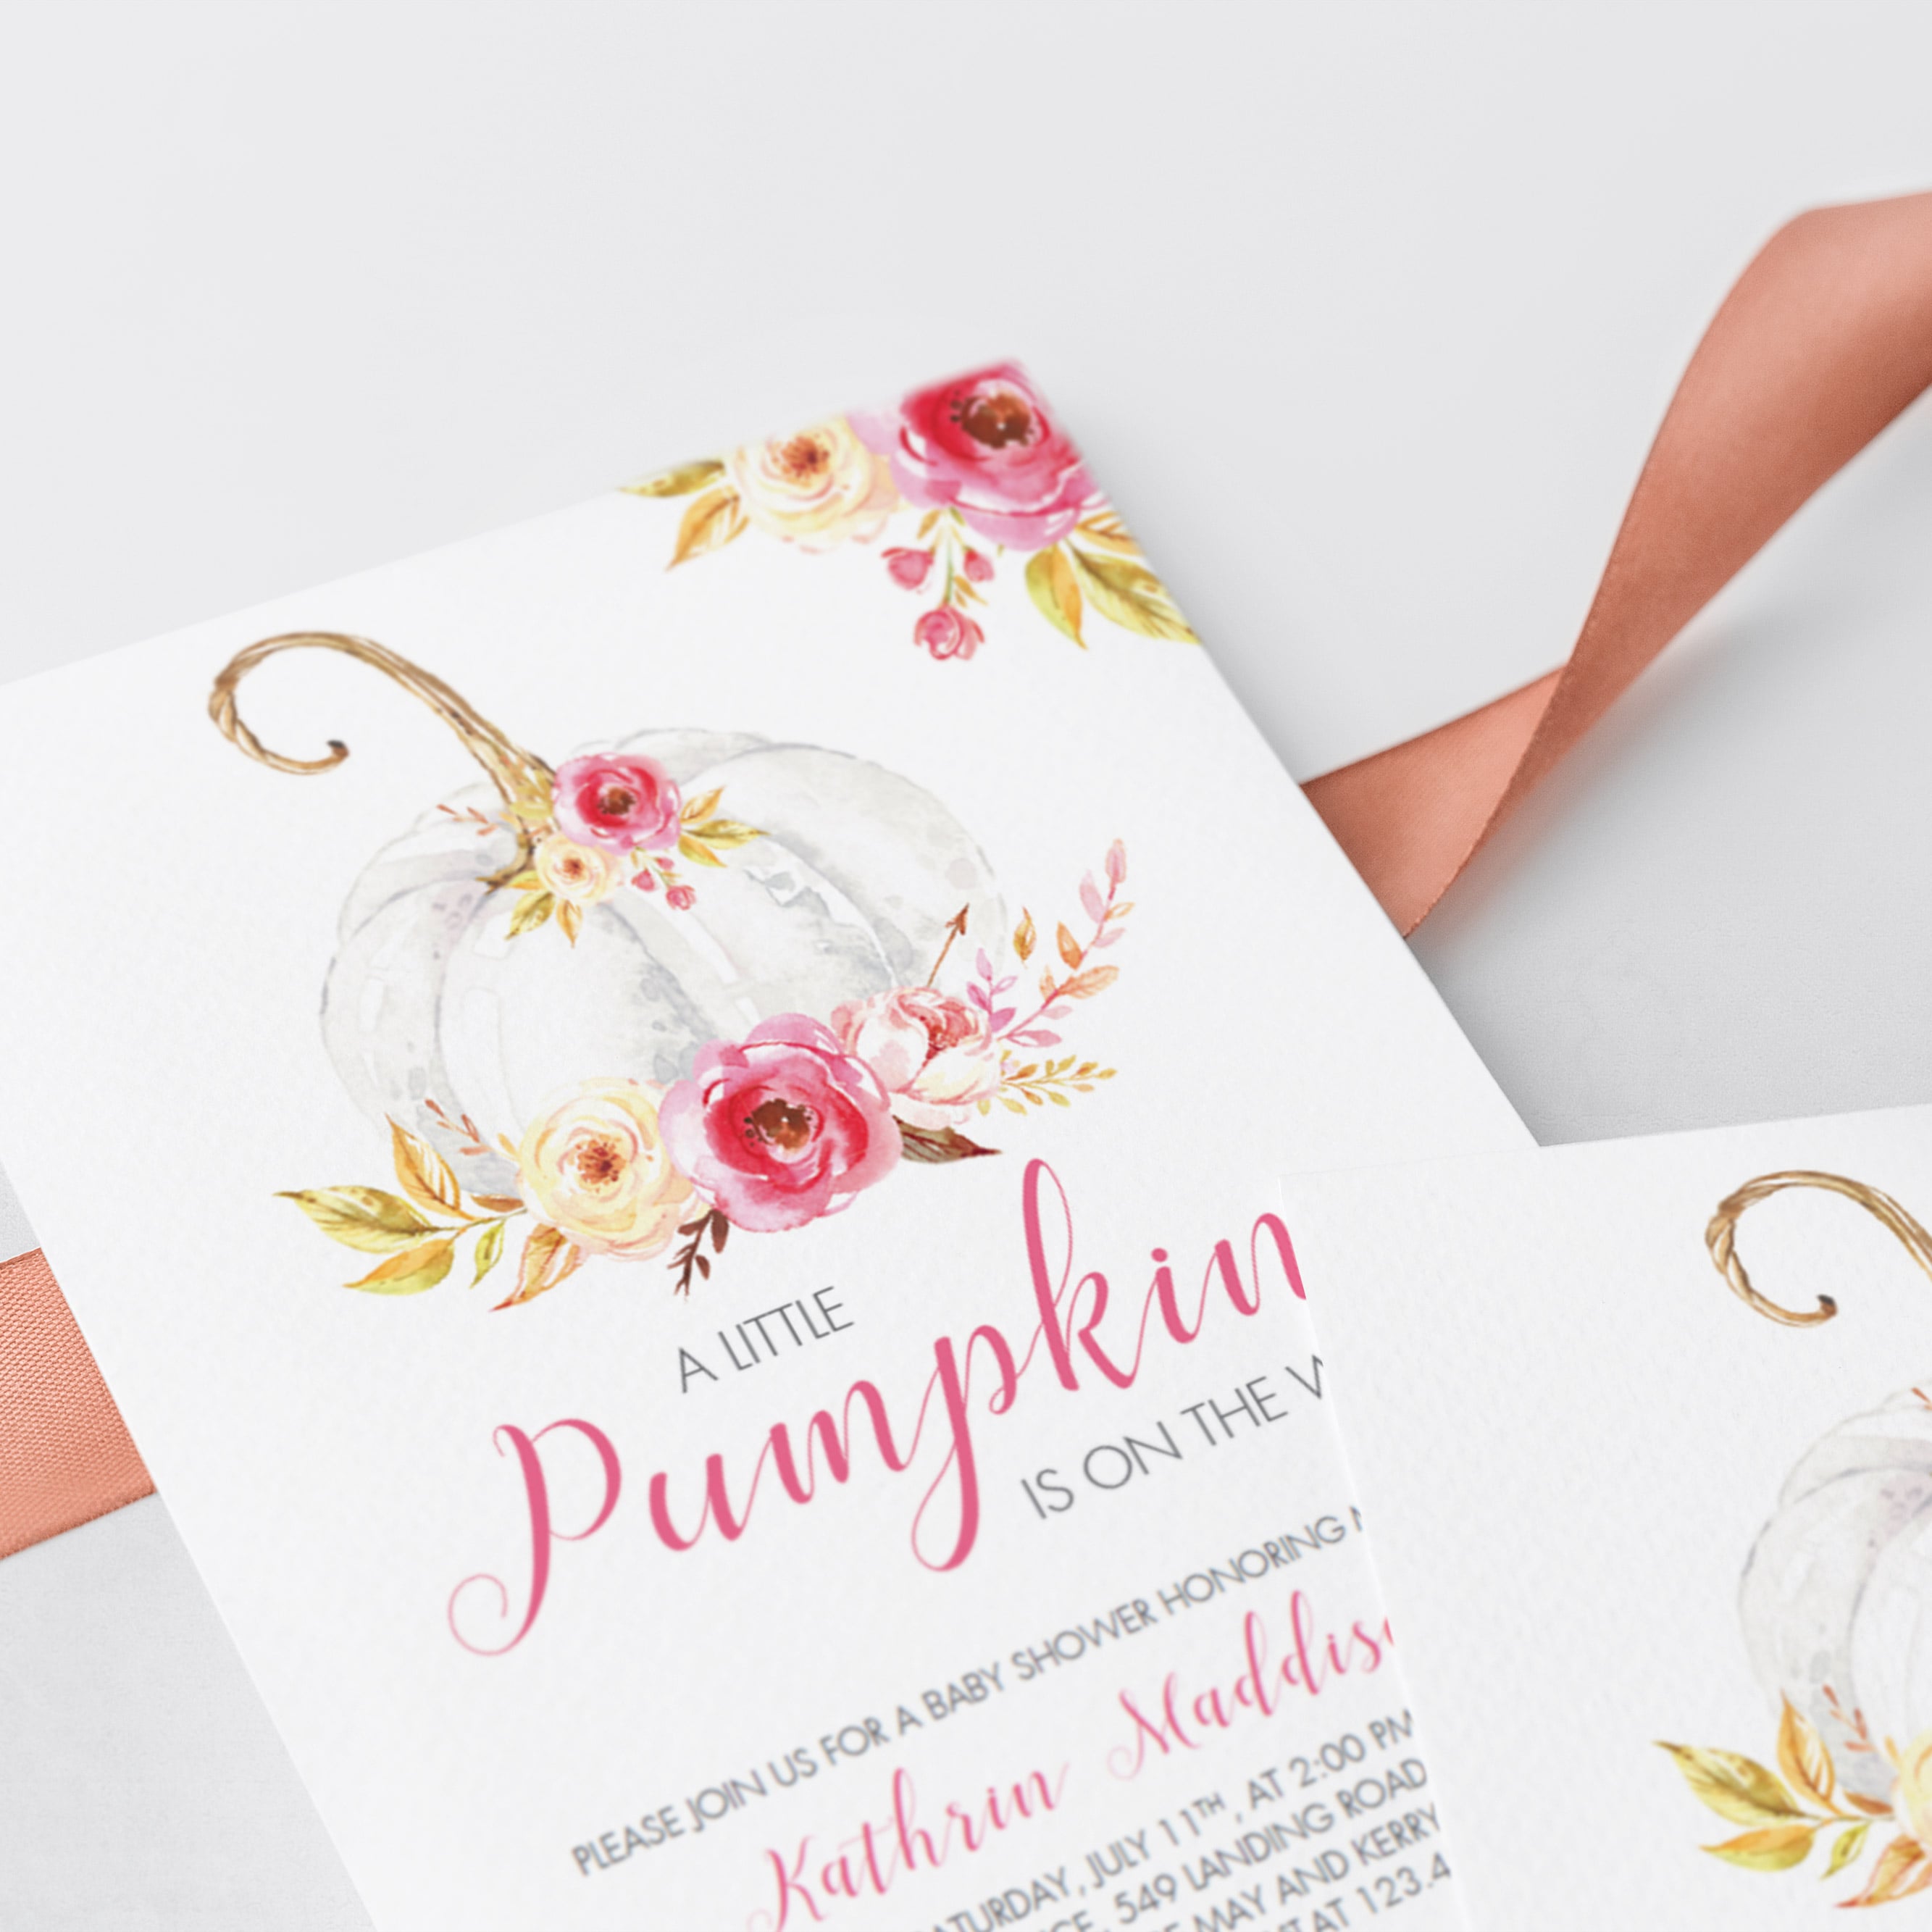 Fall baby shower invitation digital download by LittleSizzle